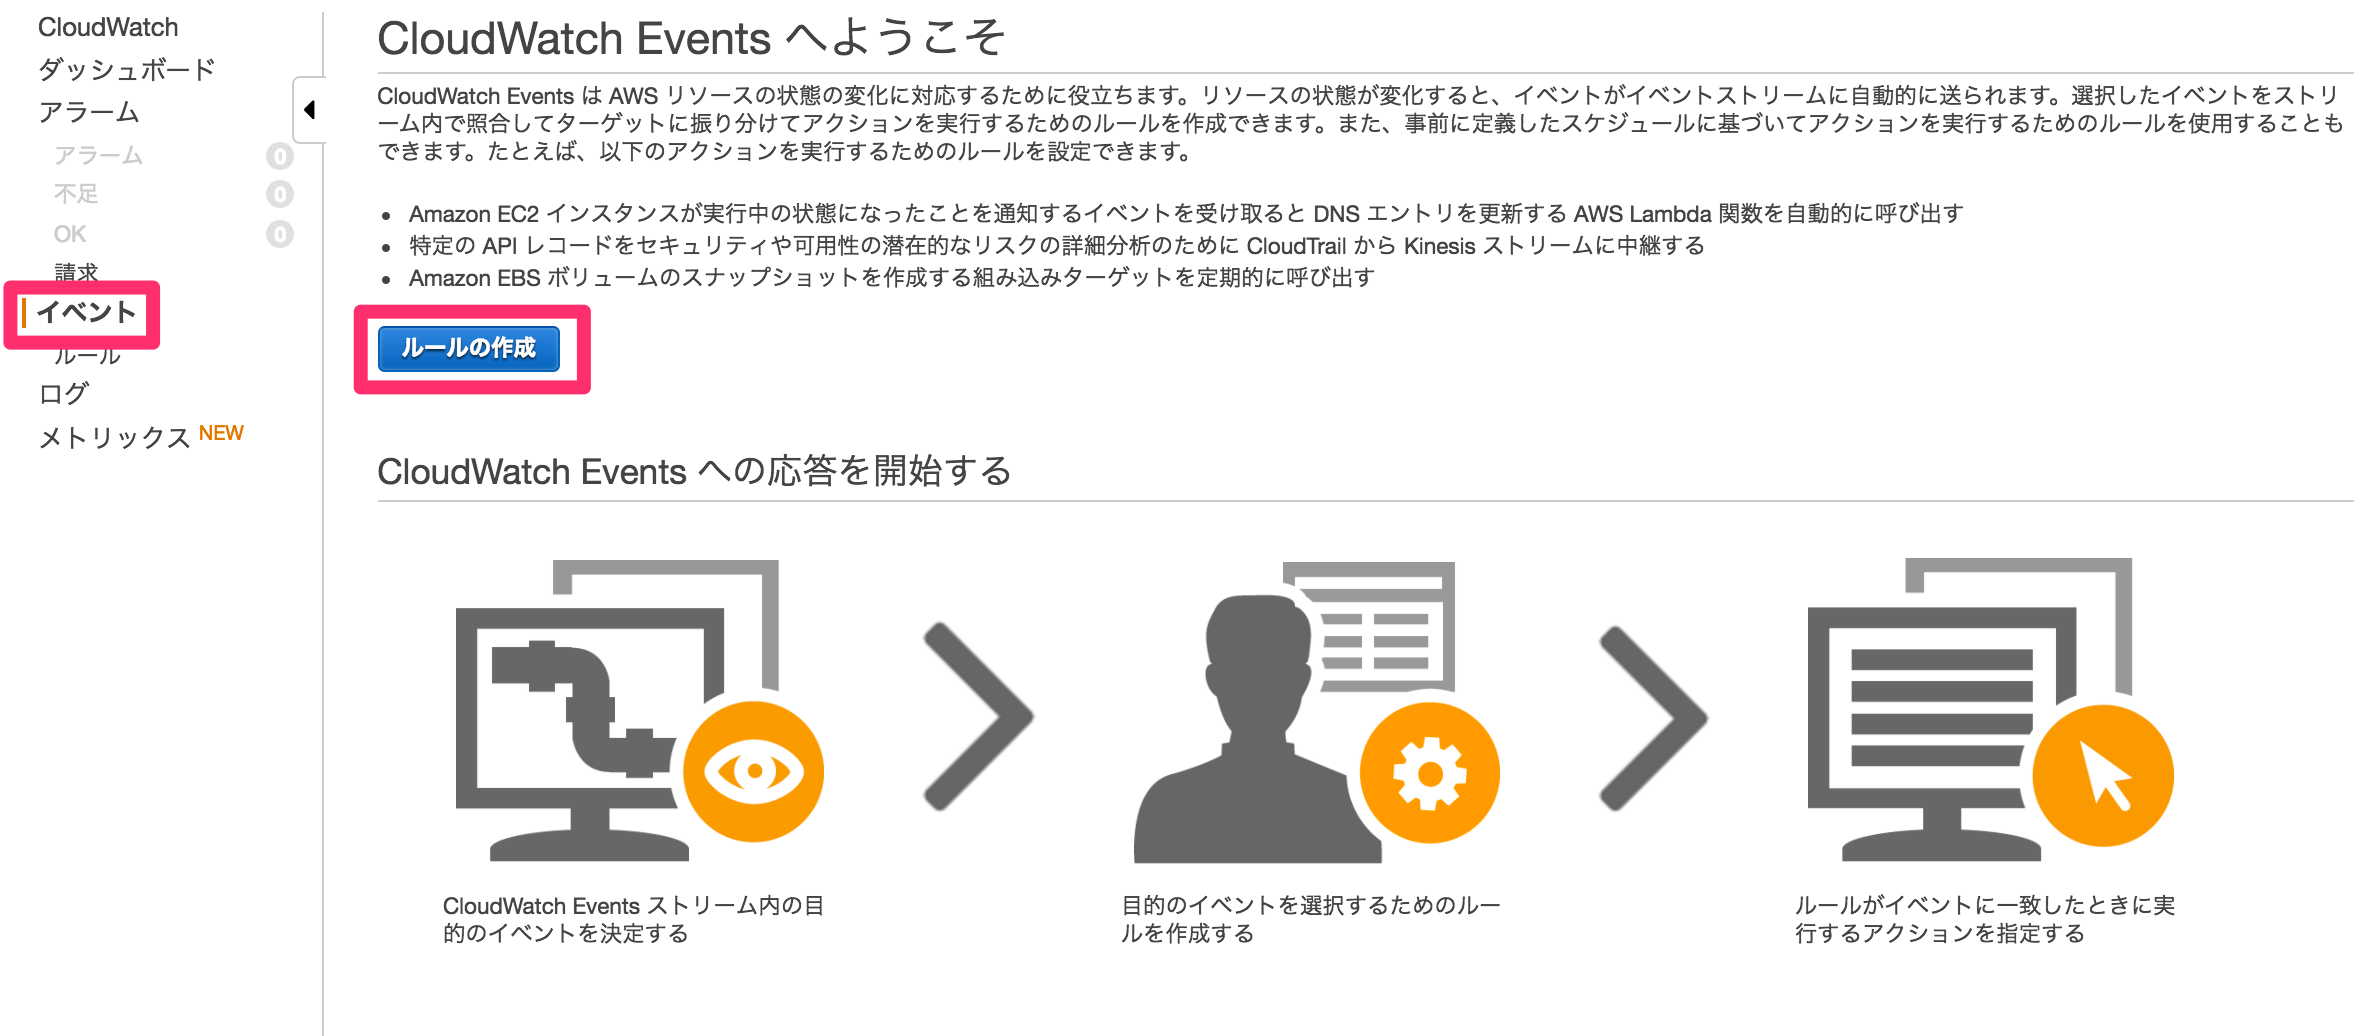 13-cloudwatch-events